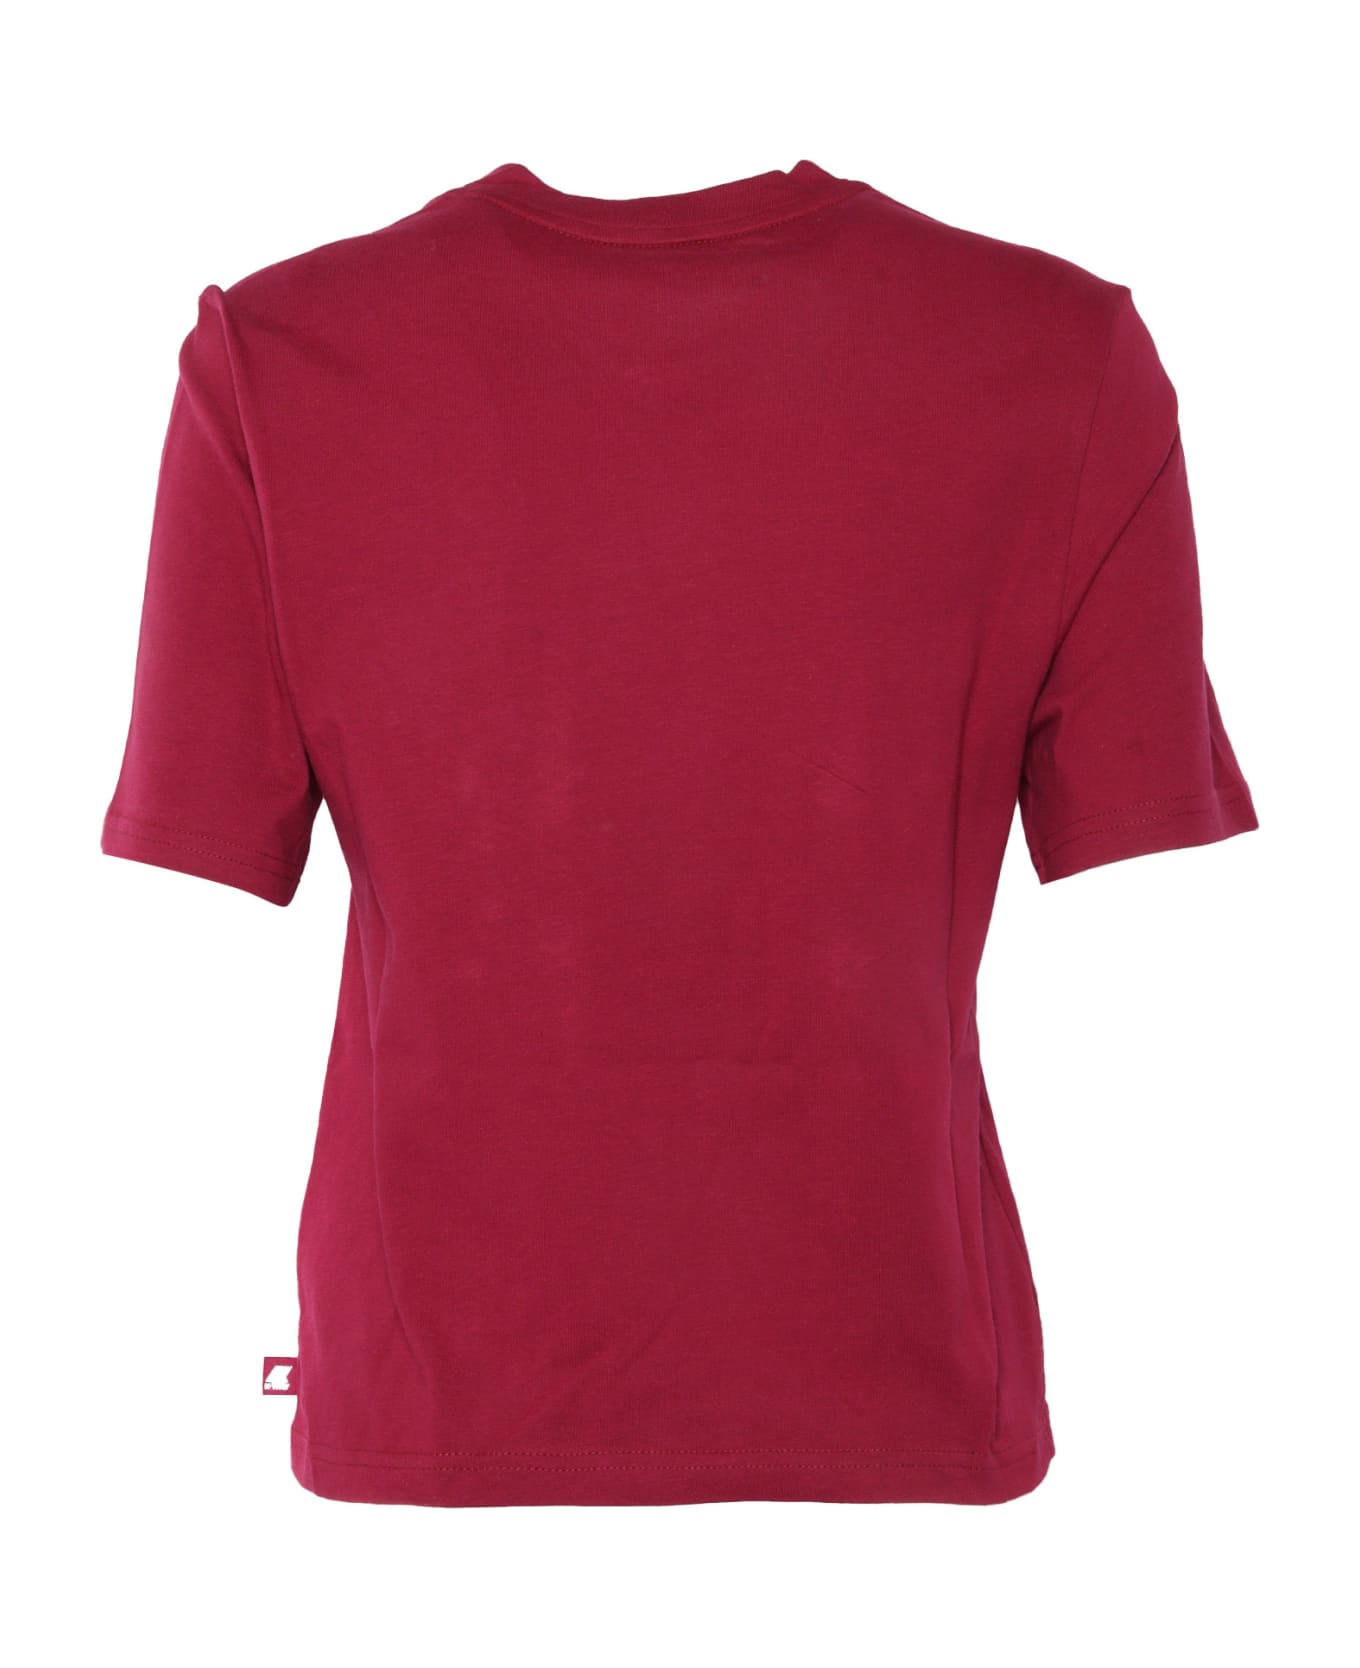 K-Way Red Amilly T-shirt - RED